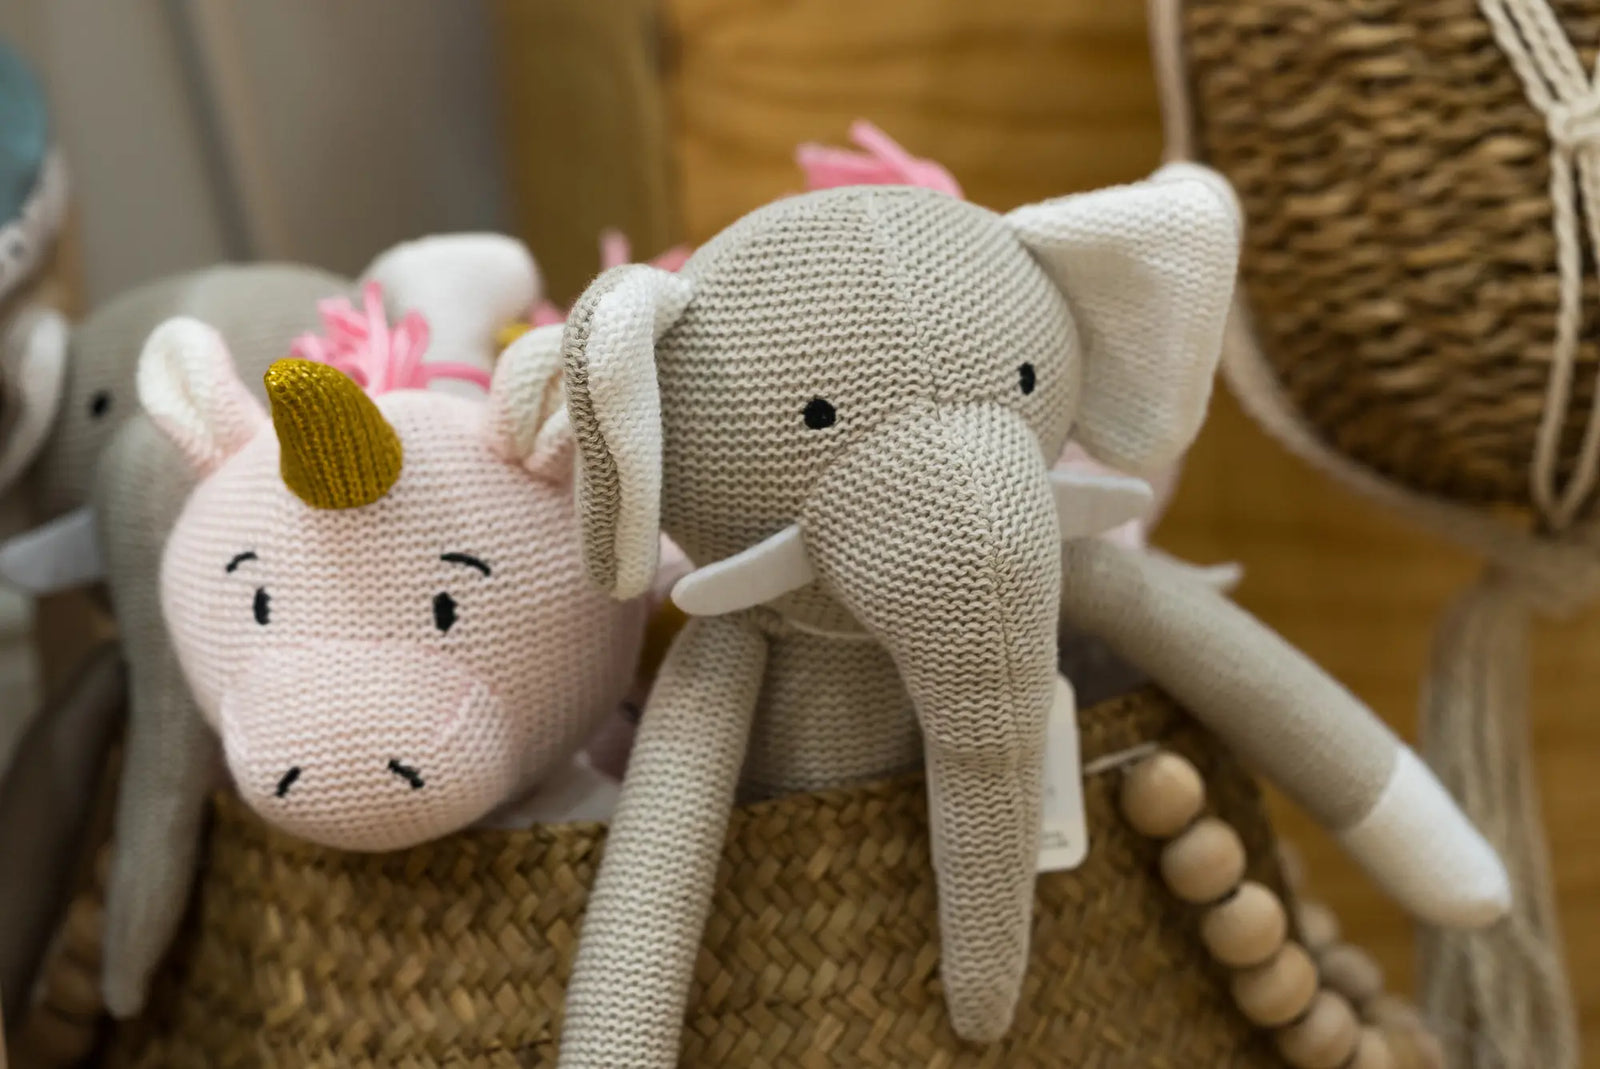 Knitted elephant kids toy in box next to knitted kids pig toy.